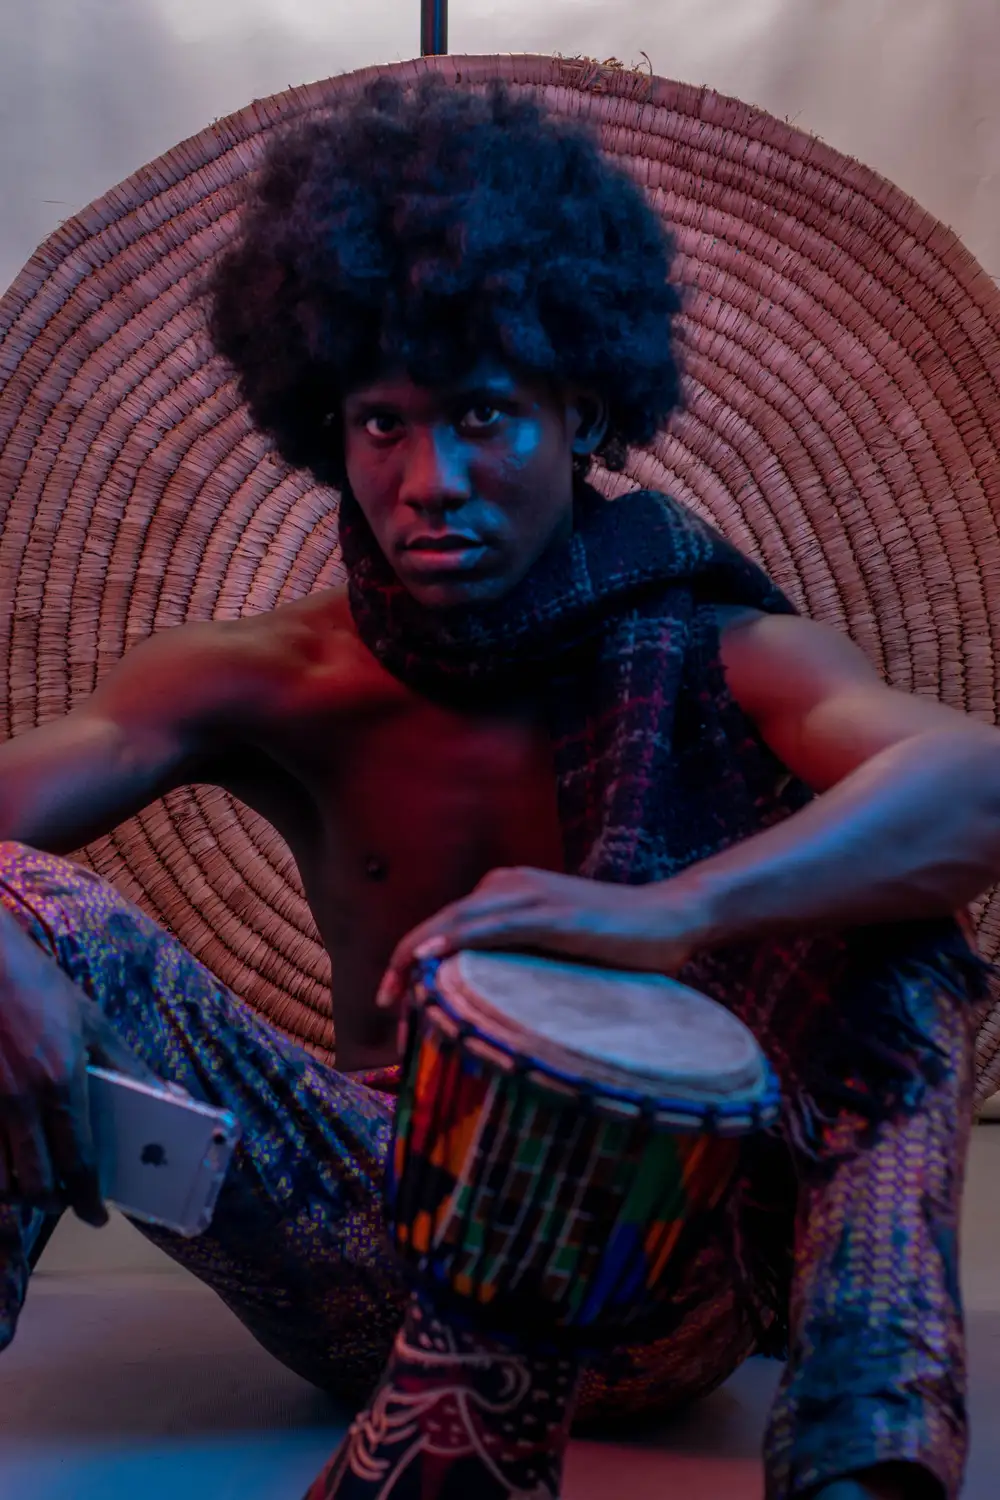 model on afro hairstyle plays his drum